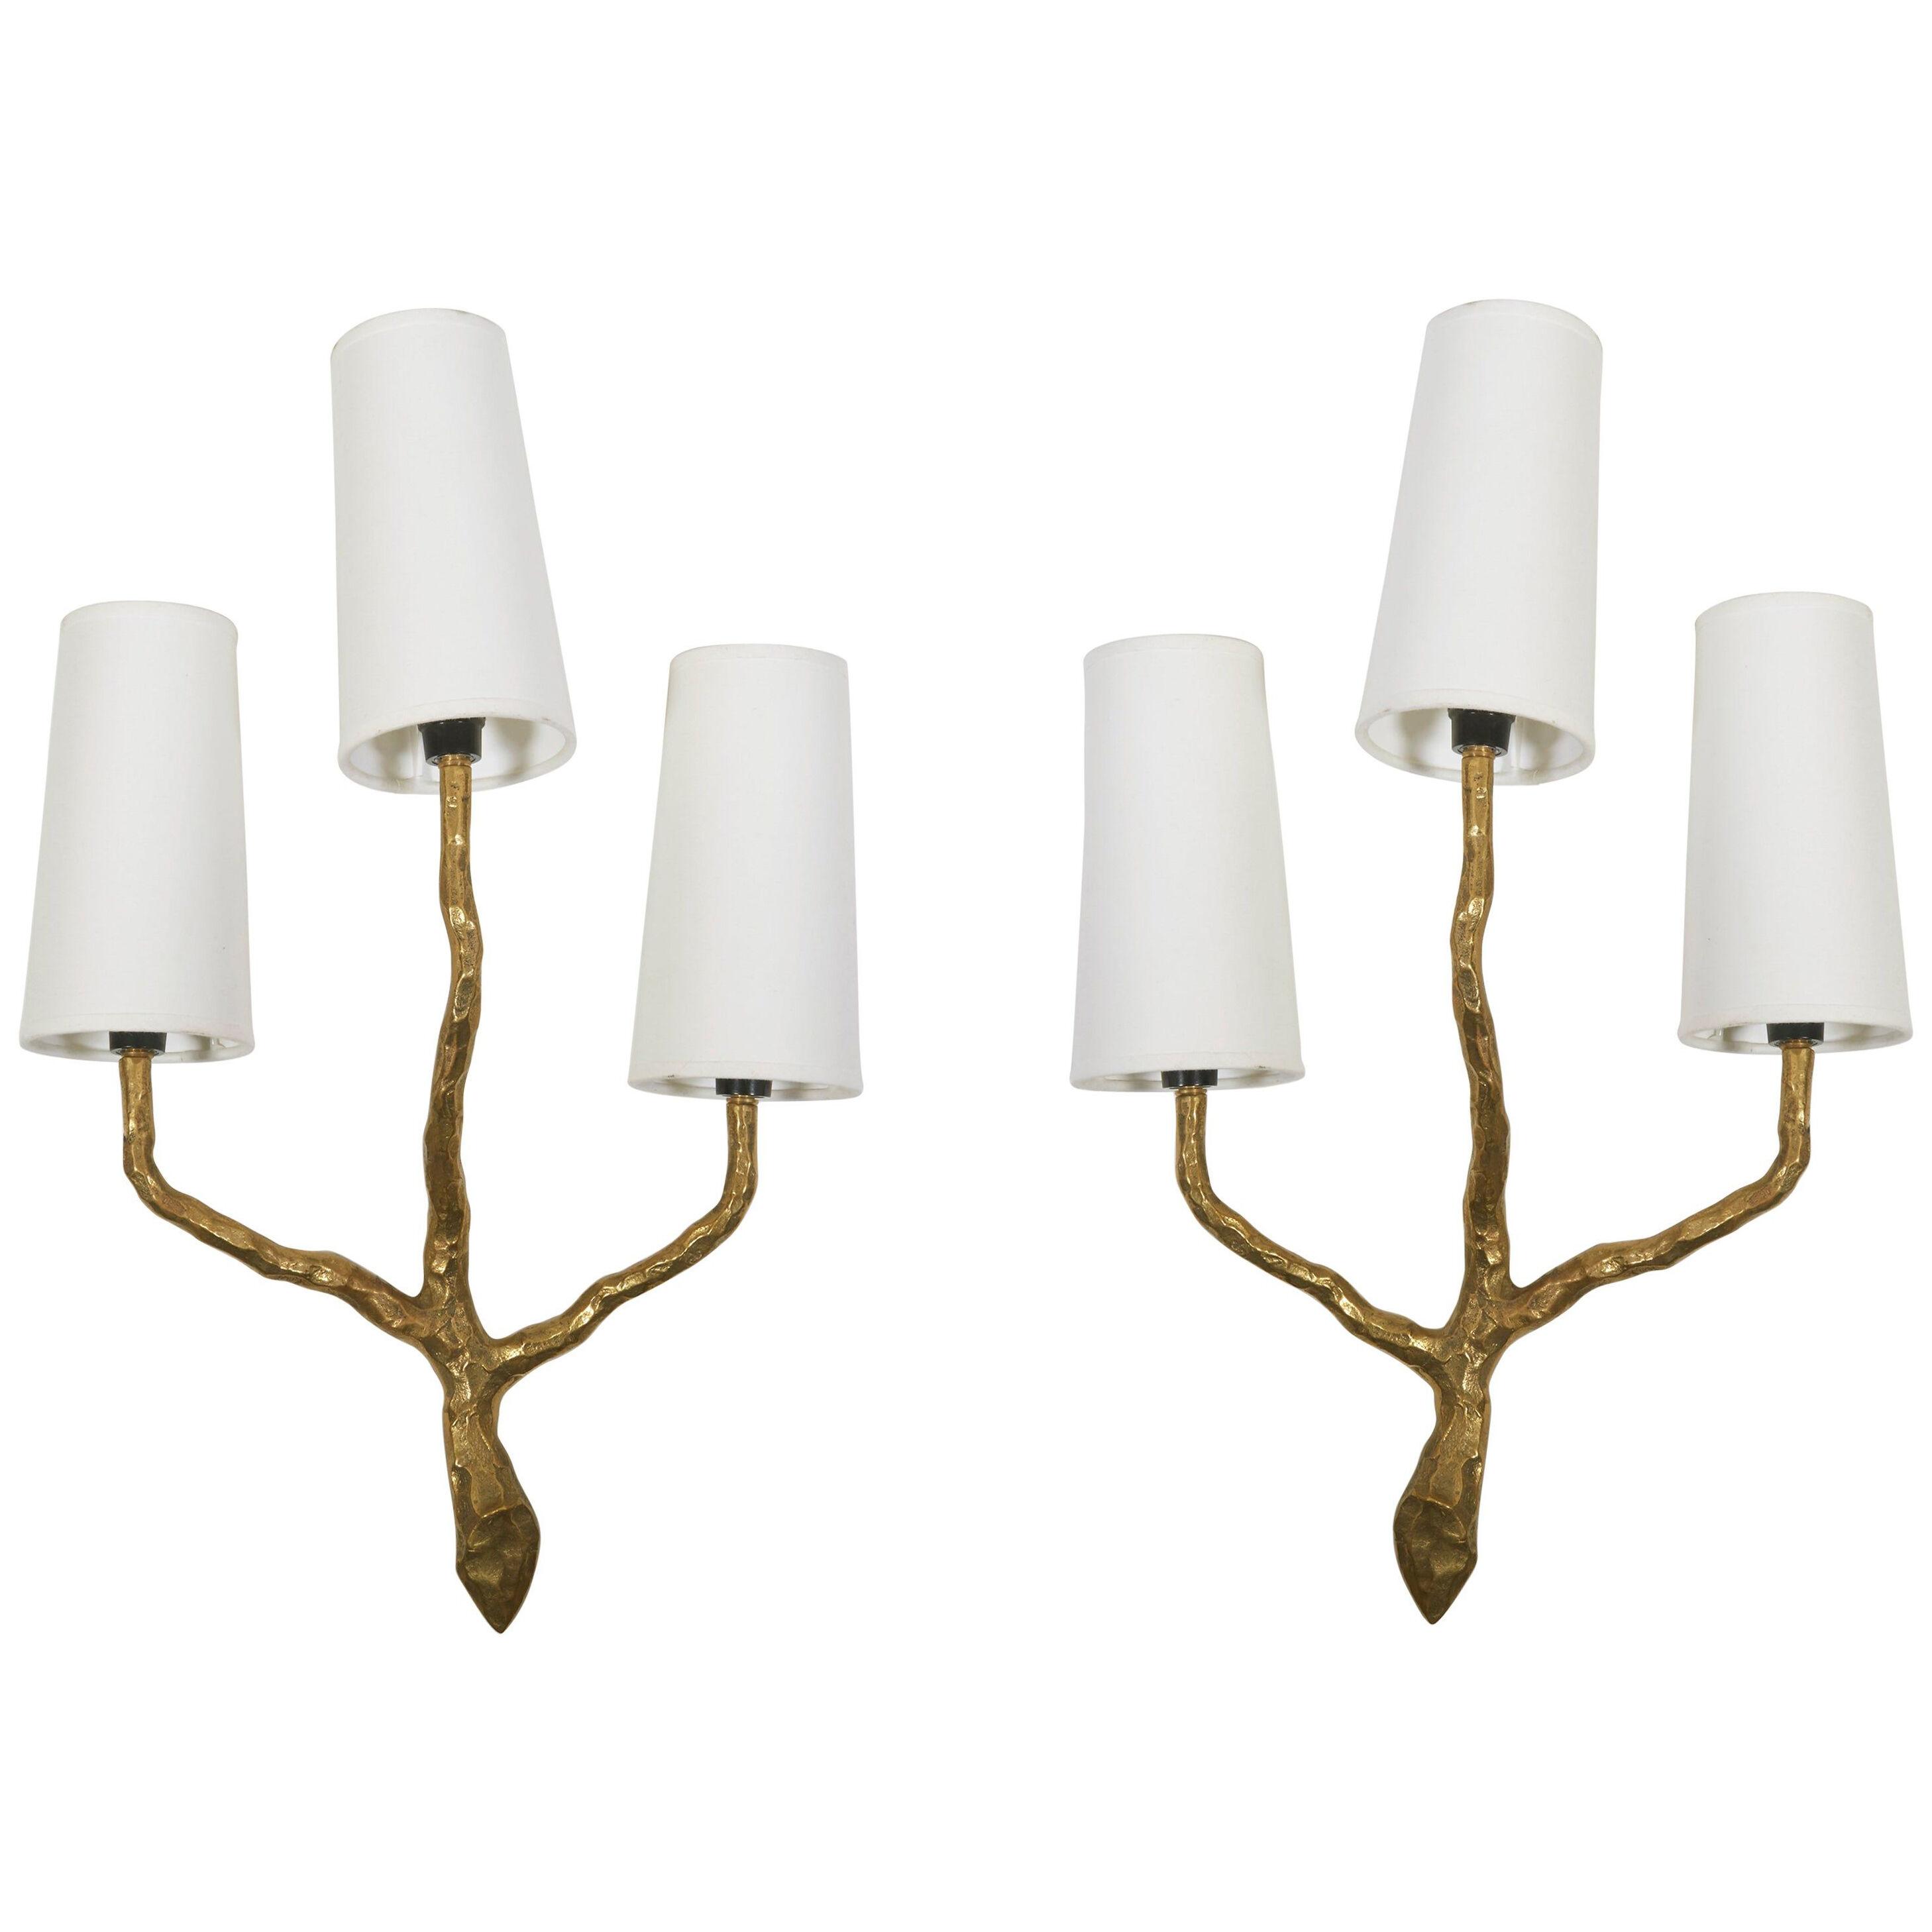 French Art Decorative wall sconces by Maison Arlus